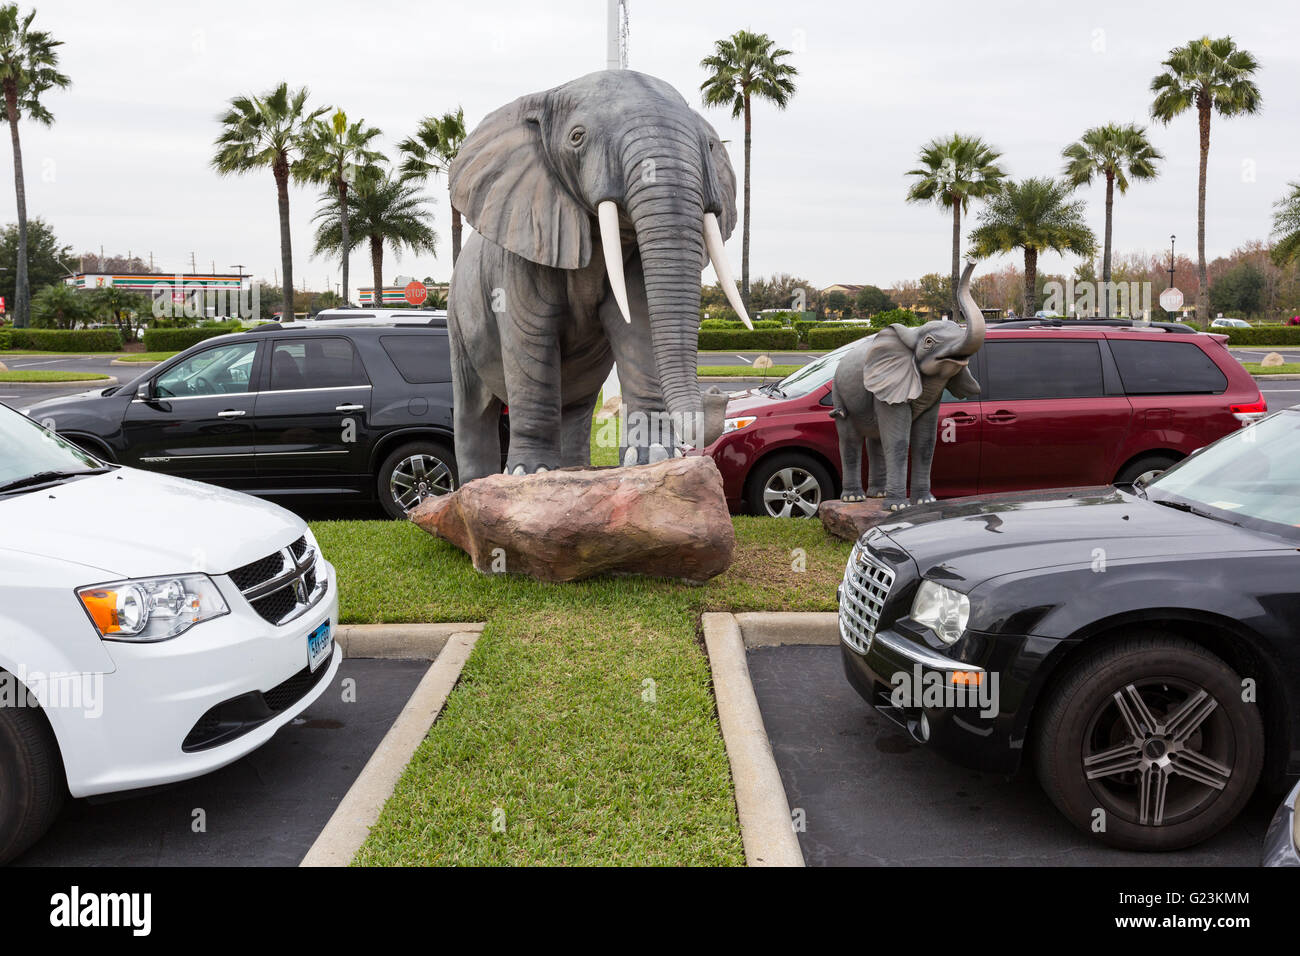 Plastic elephants decorate the parking lot of the Holy Land Experience Christian theme park in Orlando, Florida. Stock Photo